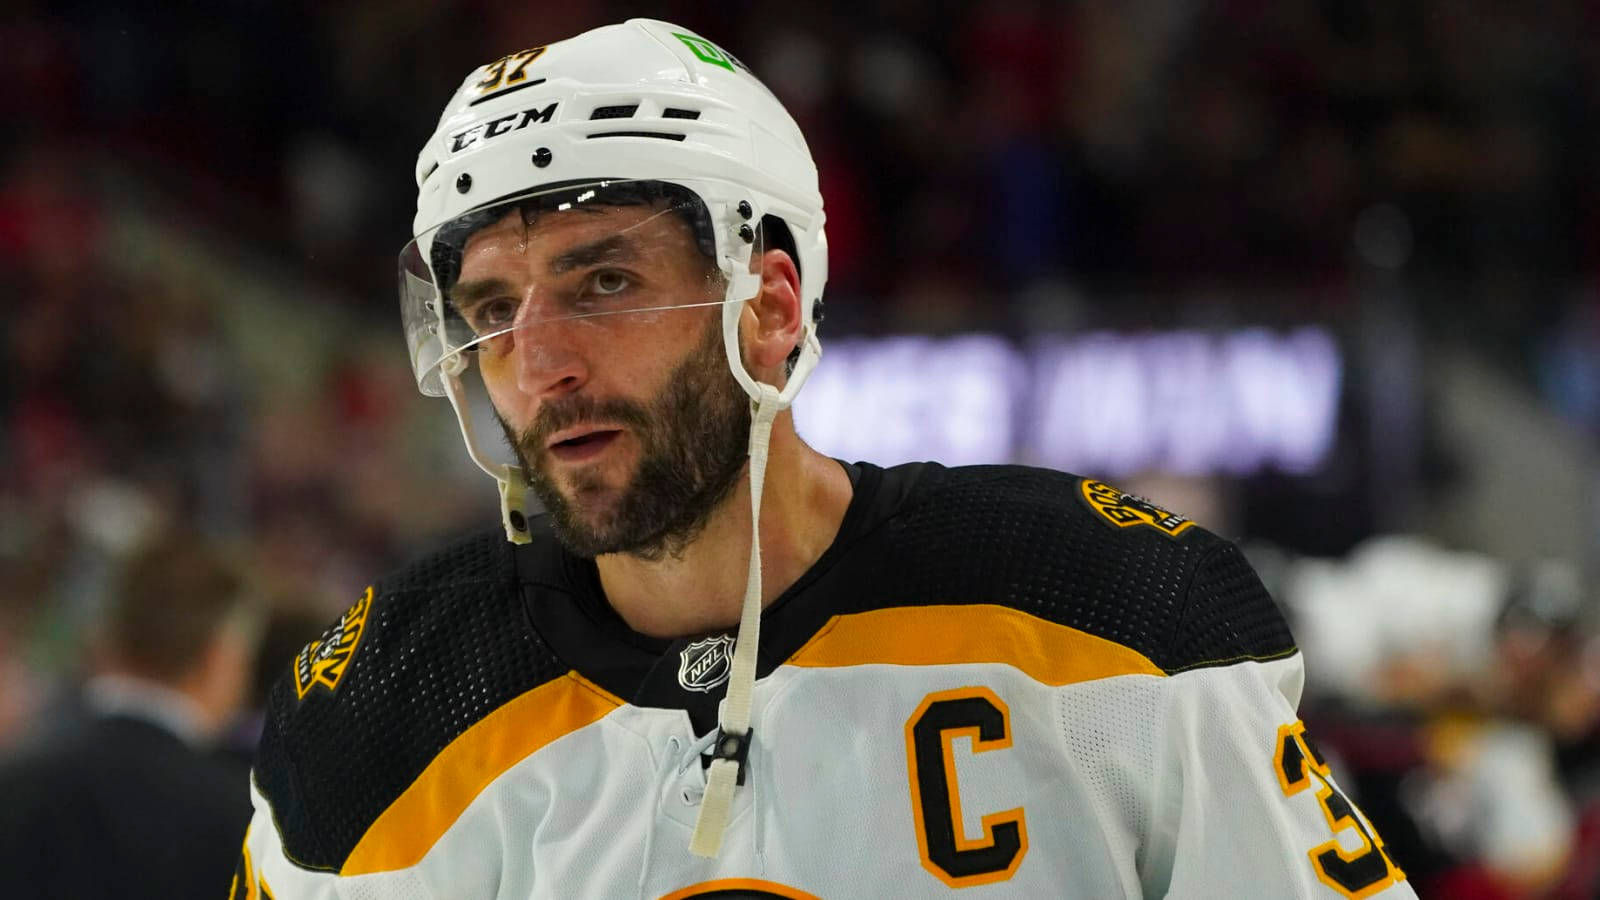 "Patrice Bergeron in action, donning the Boston Bruins white uniform." Wallpaper